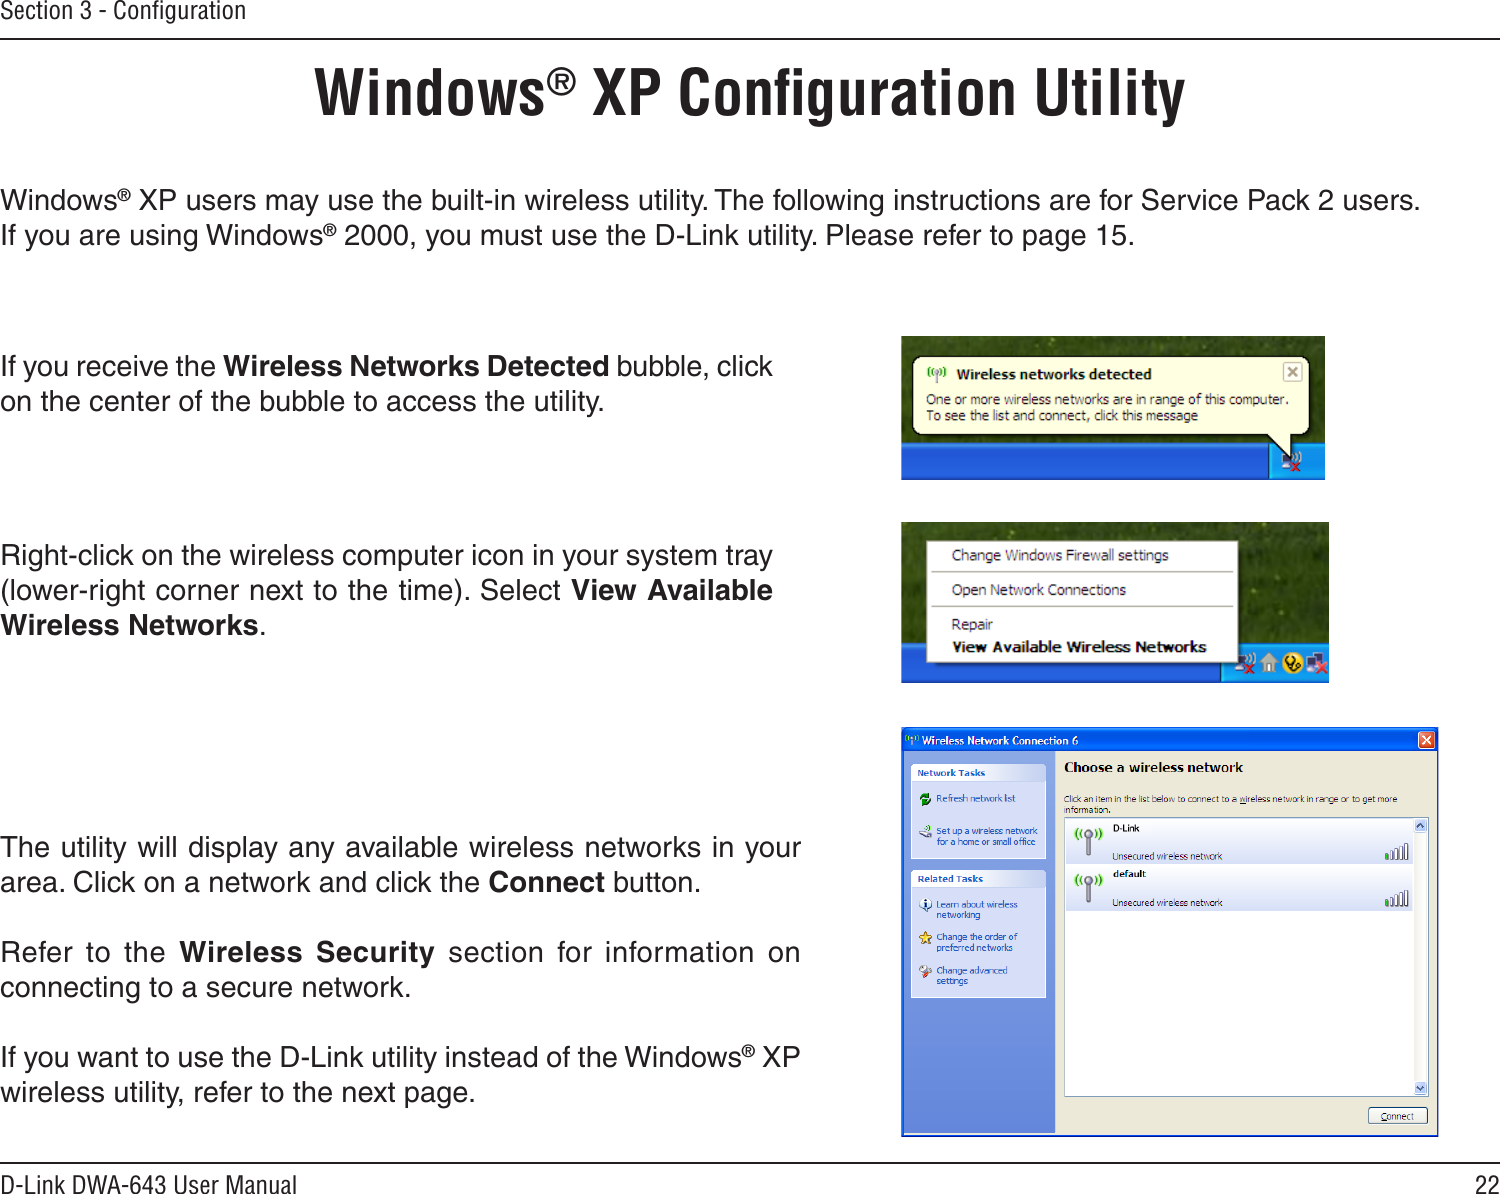 22D-Link DWA-643 User ManualSection 3 - ConﬁgurationWindows® XP Conﬁguration UtilityWindows® XP users may use the built-in wireless utility. The following instructions are for Service Pack 2 users. If you are using Windows® 2000, you must use the D-Link utility. Please refer to page 15.Right-click on the wireless computer icon in your system tray (lower-right corner next to the time). Select View Available Wireless Networks.If you receive the Wireless Networks Detected bubble, click on the center of the bubble to access the utility.The utility will display any available wireless networks in your area. Click on a network and click the Connect button.Refer  to  the  Wireless  Security  section  for  information  on connecting to a secure network.If you want to use the D-Link utility instead of the Windows® XP wireless utility, refer to the next page.